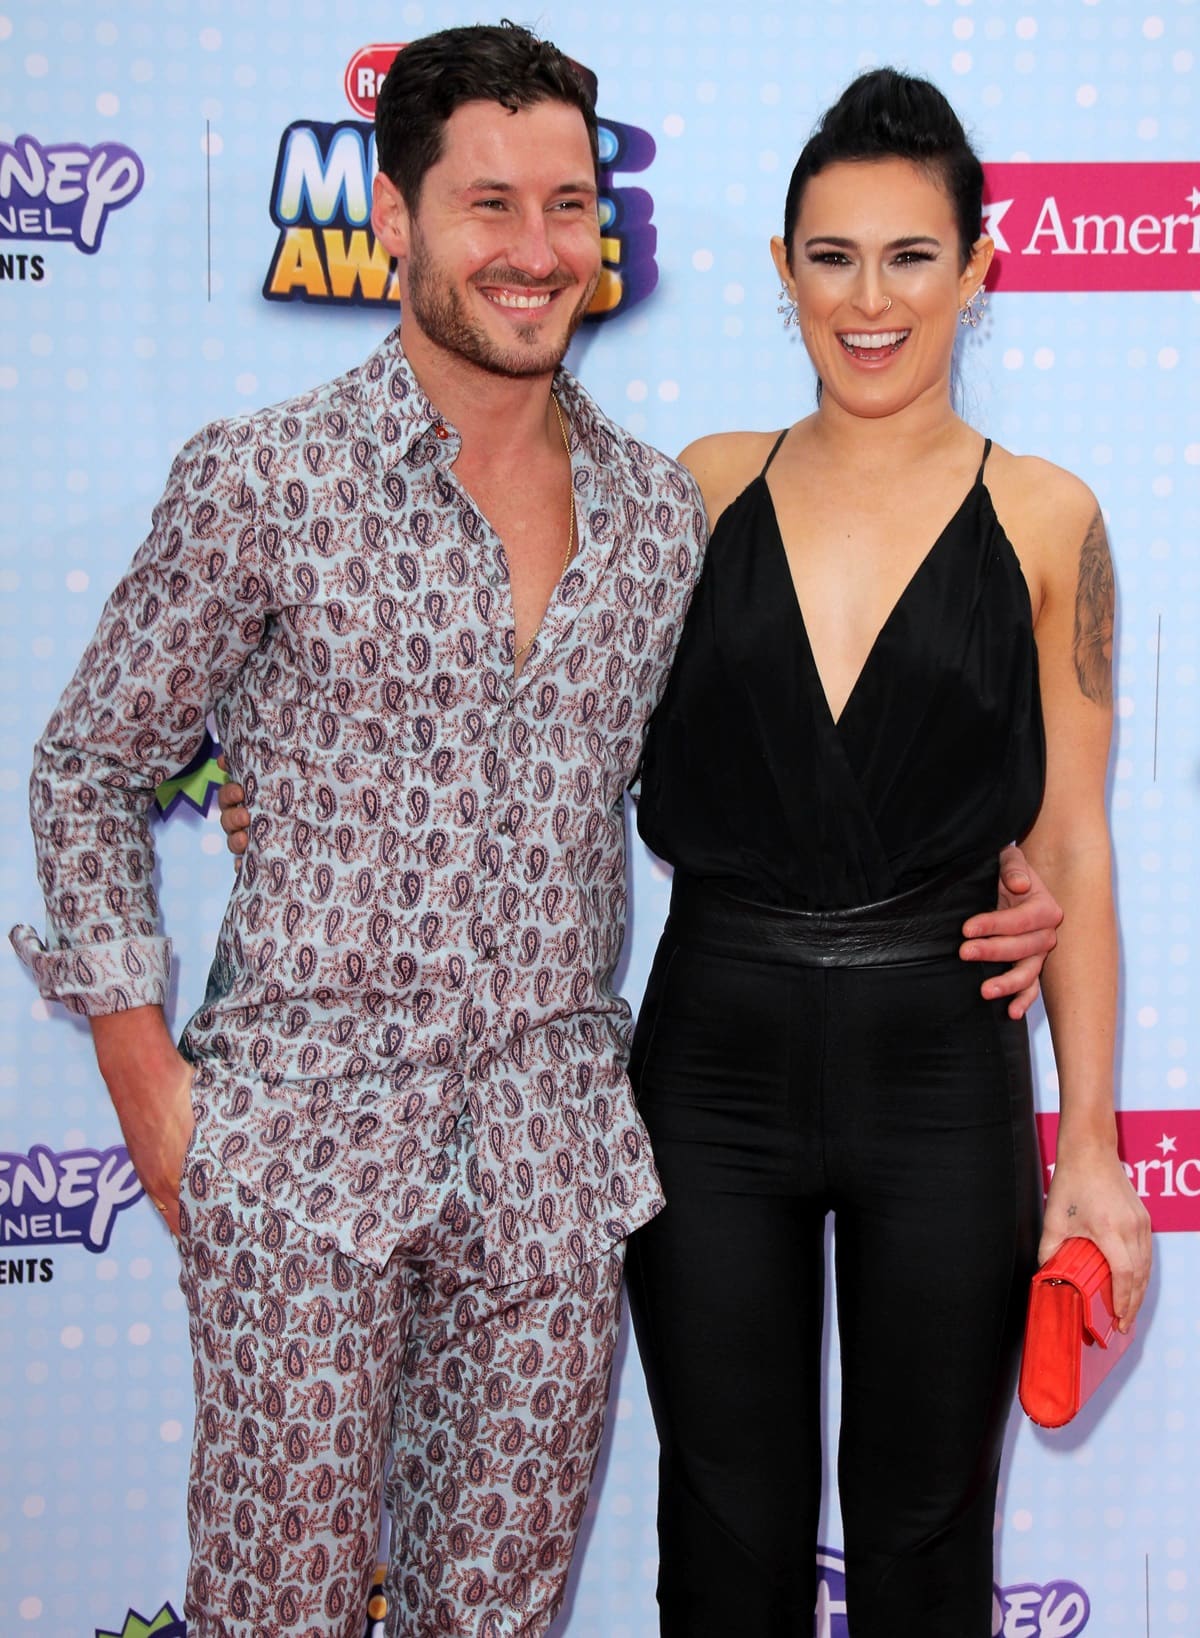 Rumer Willis and Valentin Chmerkovskiy dated from 2018 to 2019 and met while competing on season 20 of Dancing with the Stars